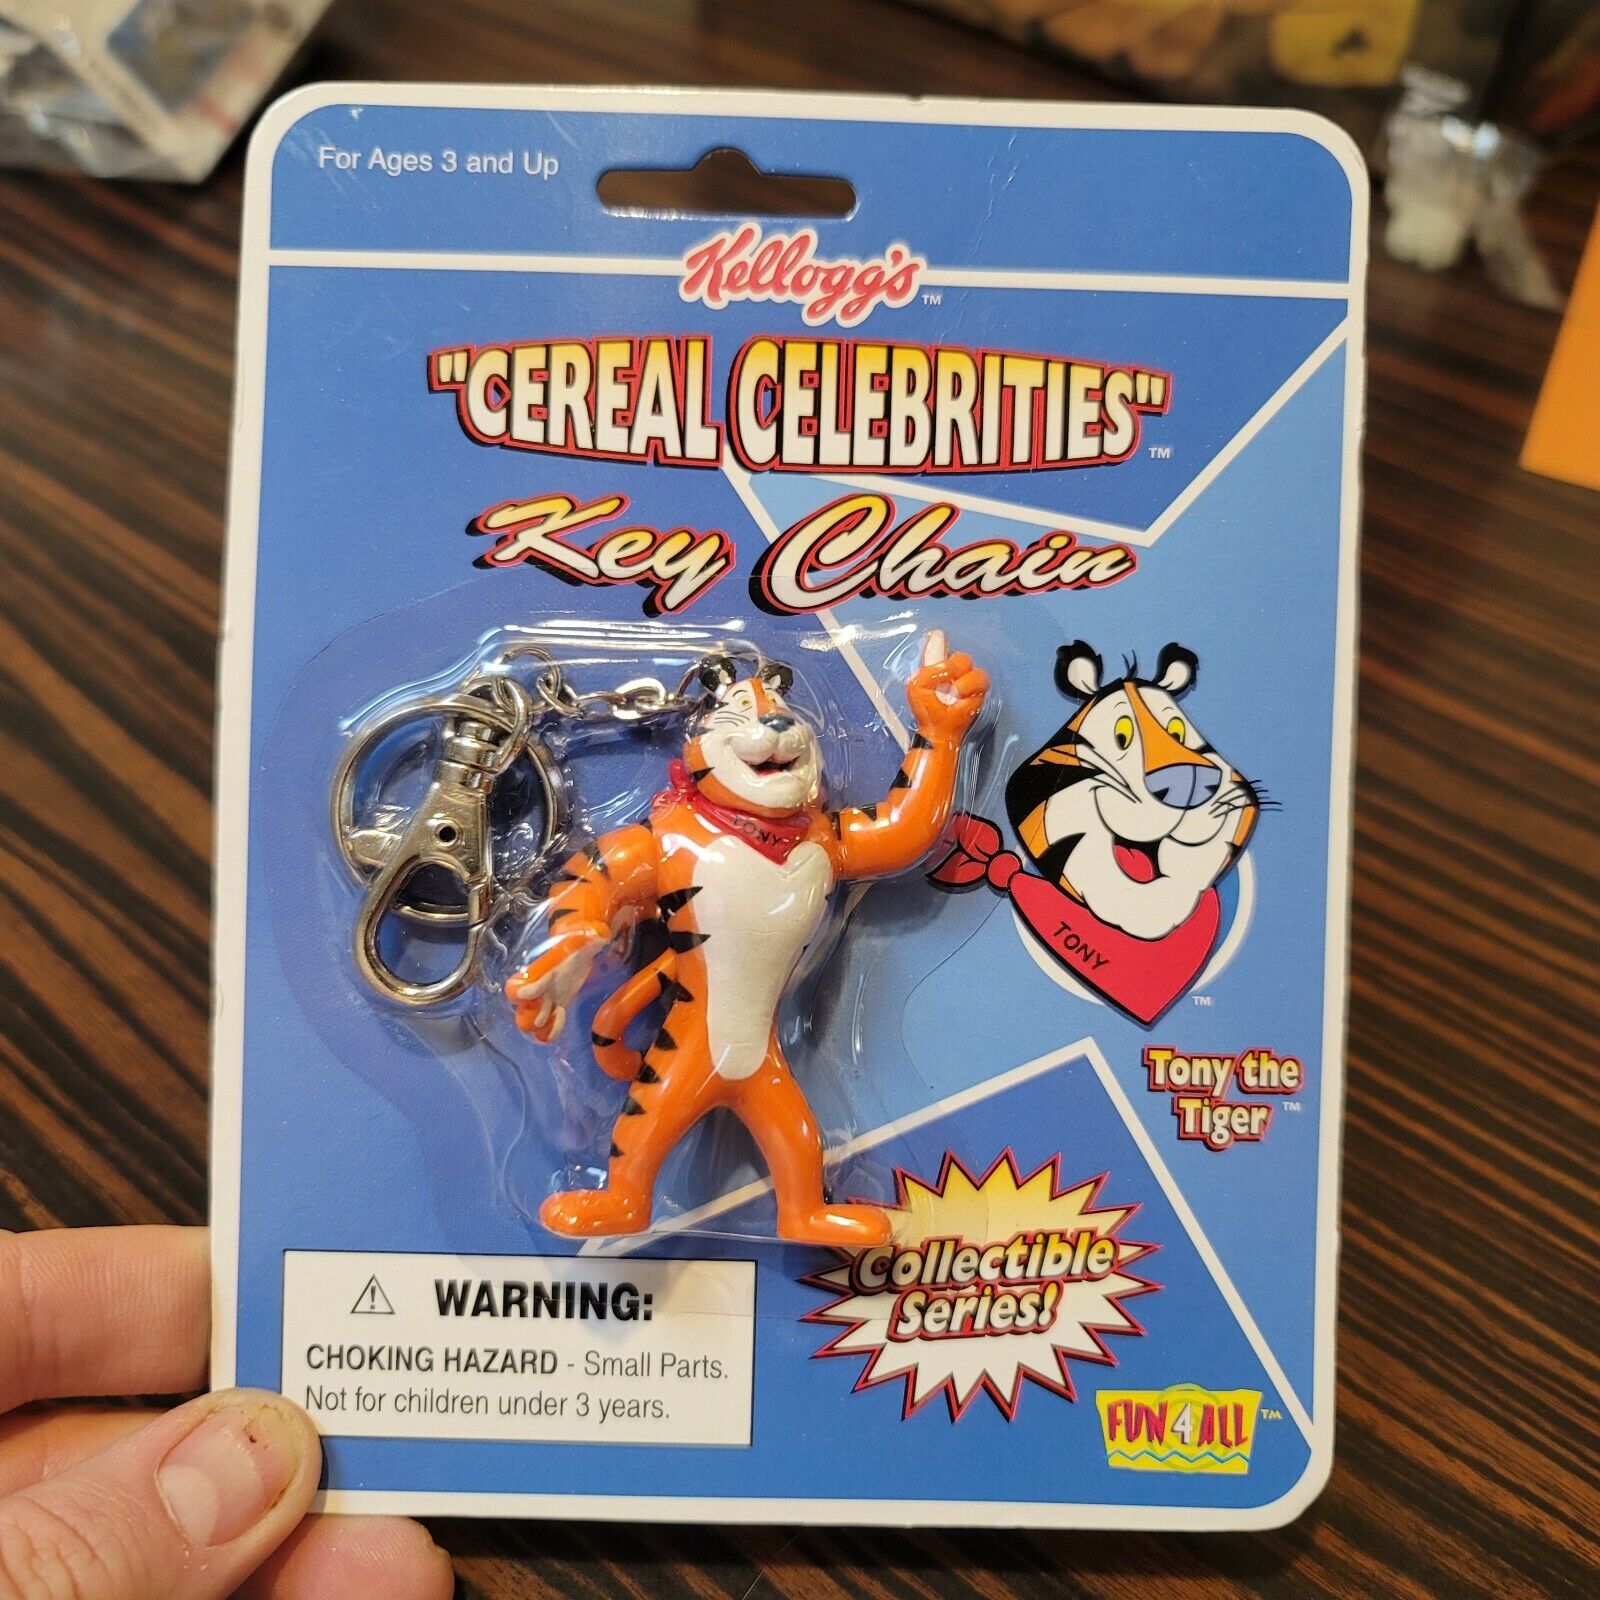 Tony The Tiger Key Chain Kellogg's Frosted Flakes Fun 4 All NOS VTG 1998 